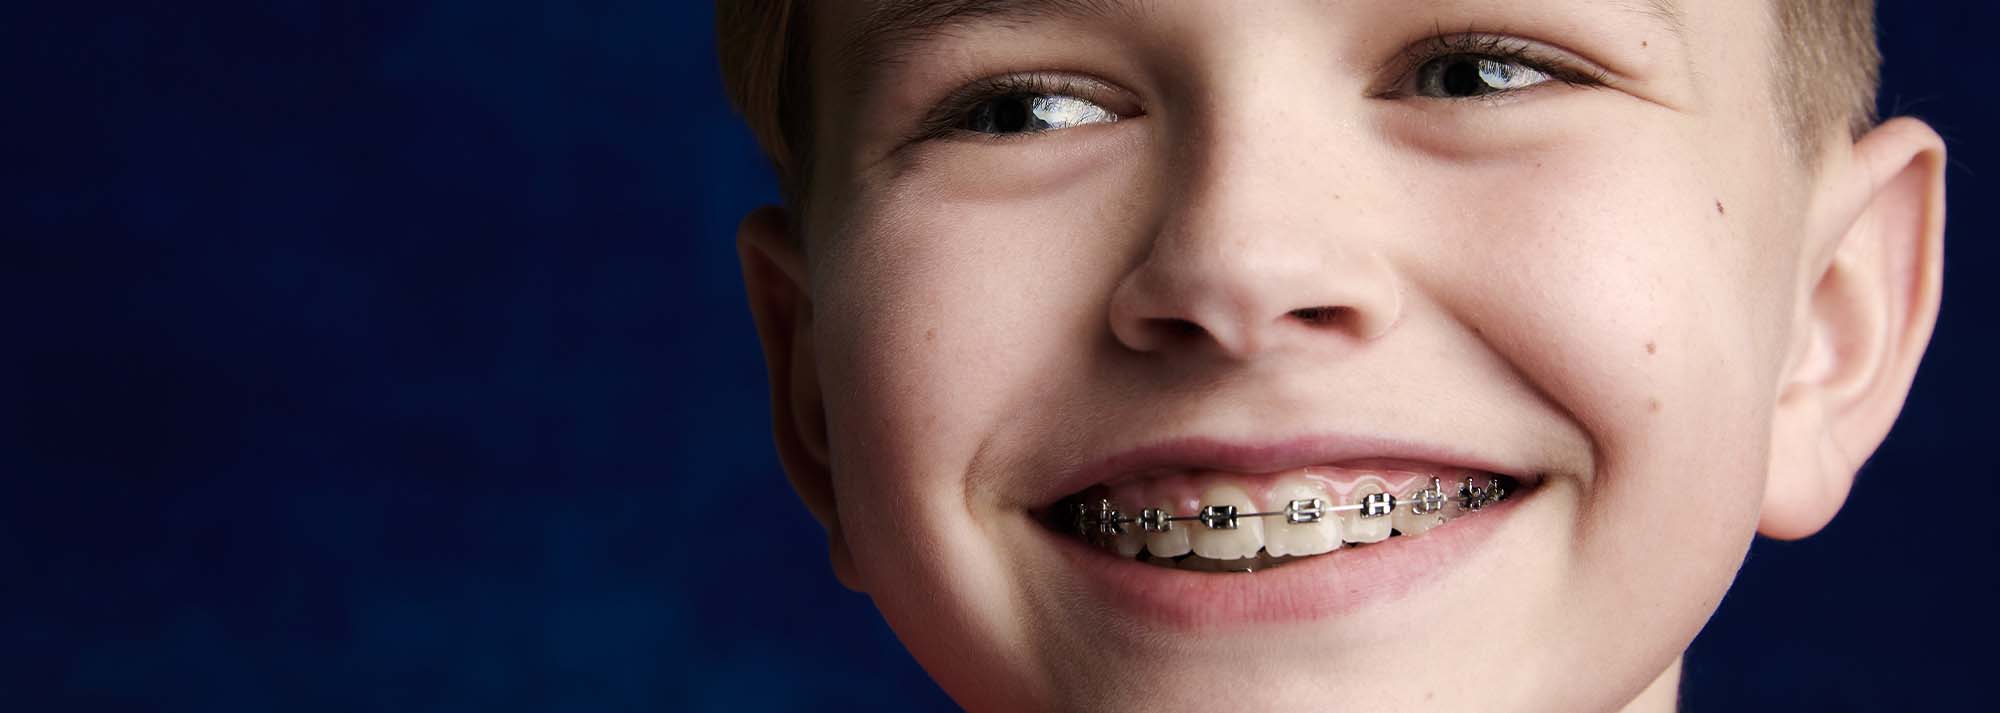 Braces orthodontic treatment offered by Smile Doctors